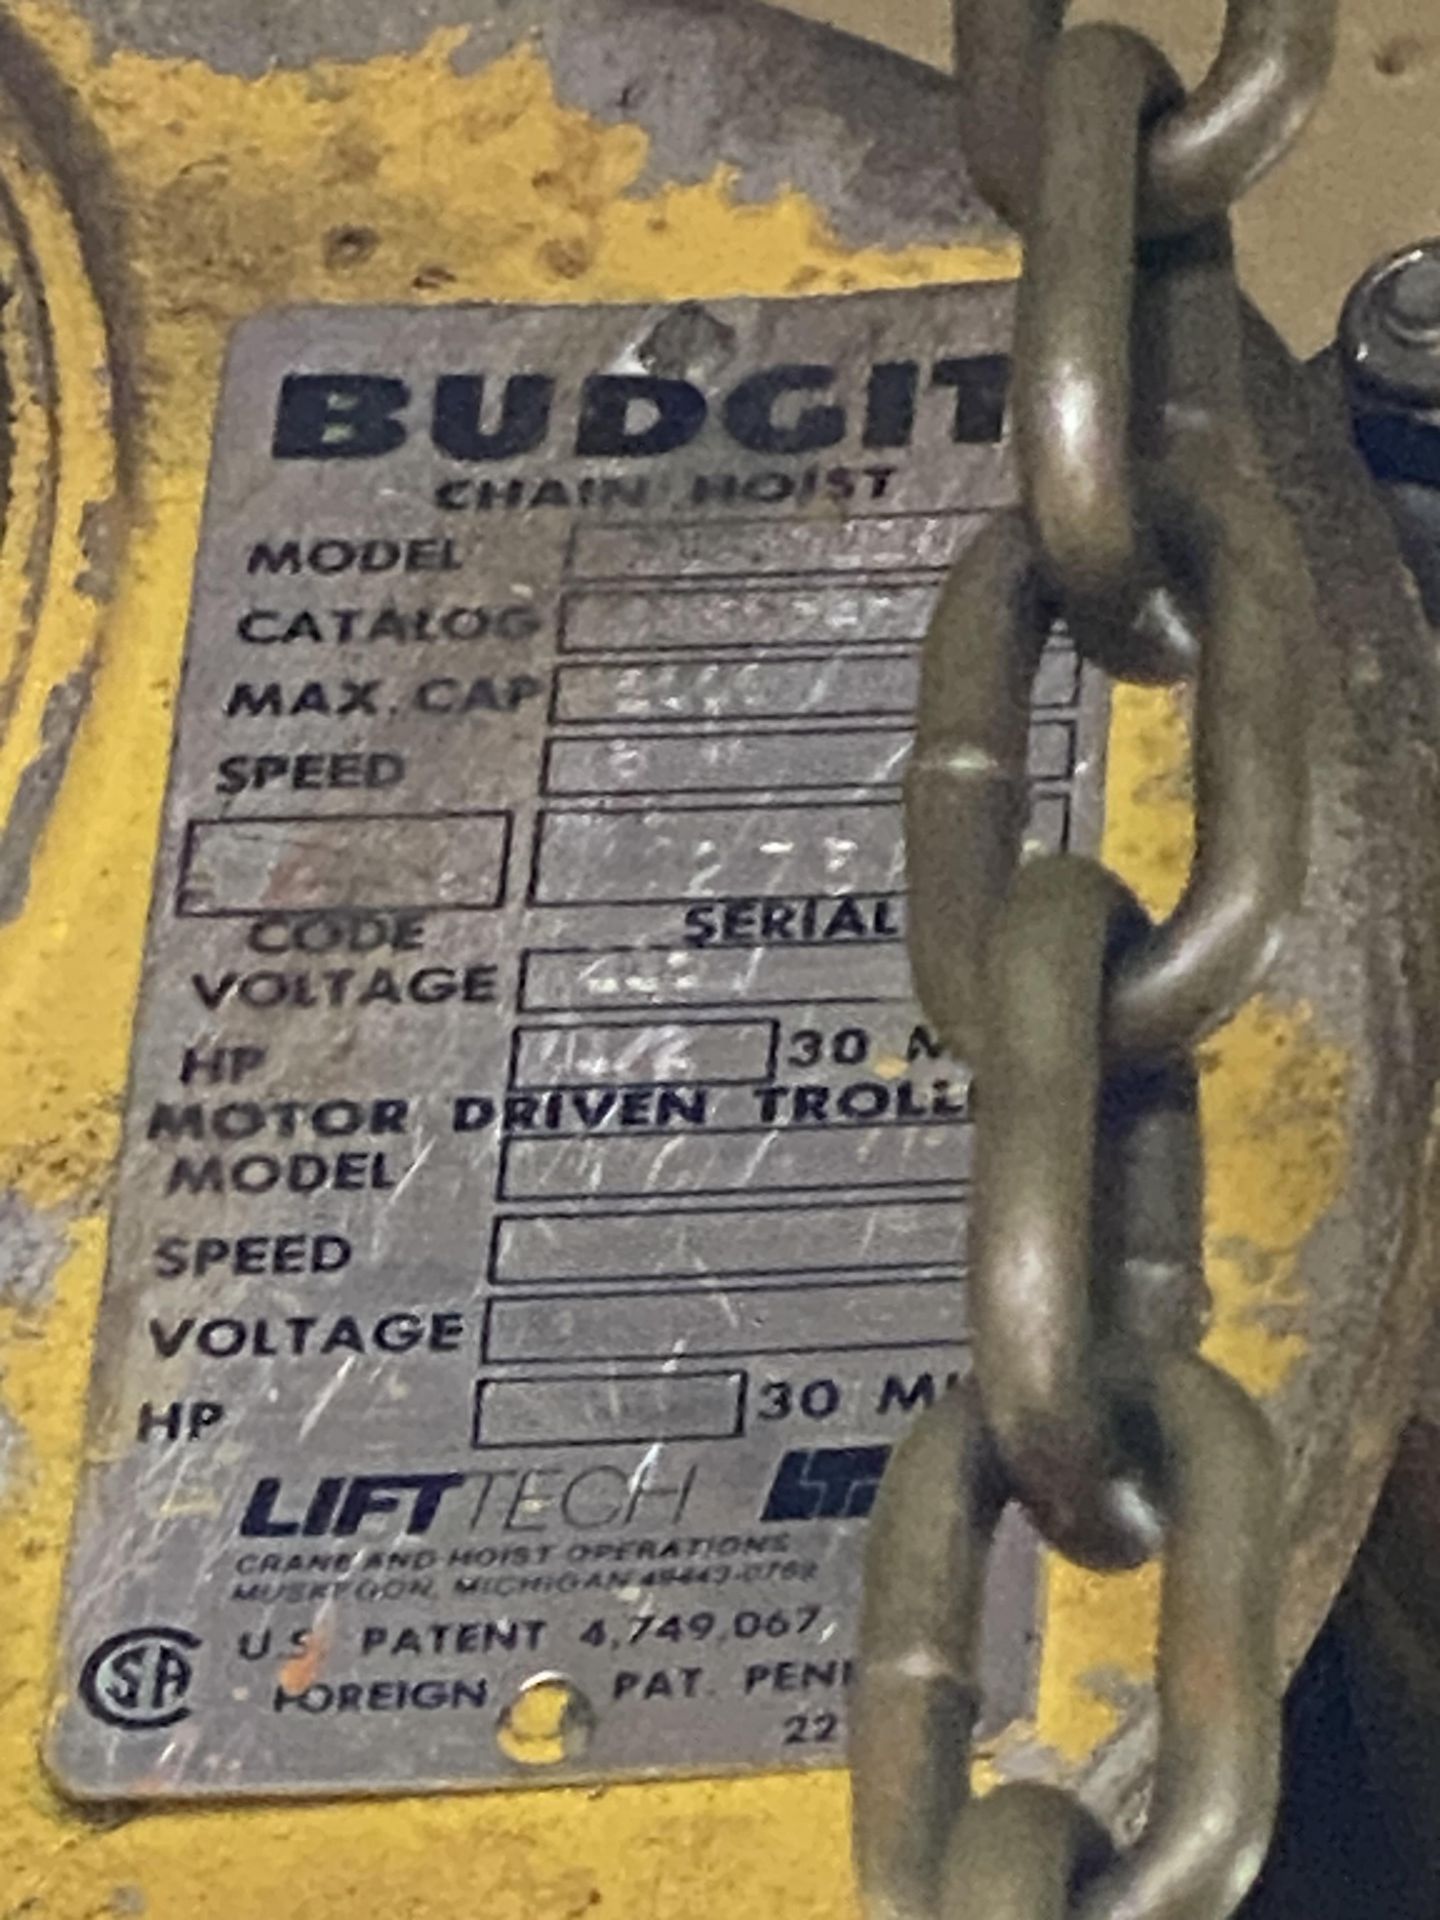 BUDGIT 1-TON HOIST W/ TROLLEY AND PENDANT CONTROL (RIGGING FEE $1,250 USD) - Image 2 of 2